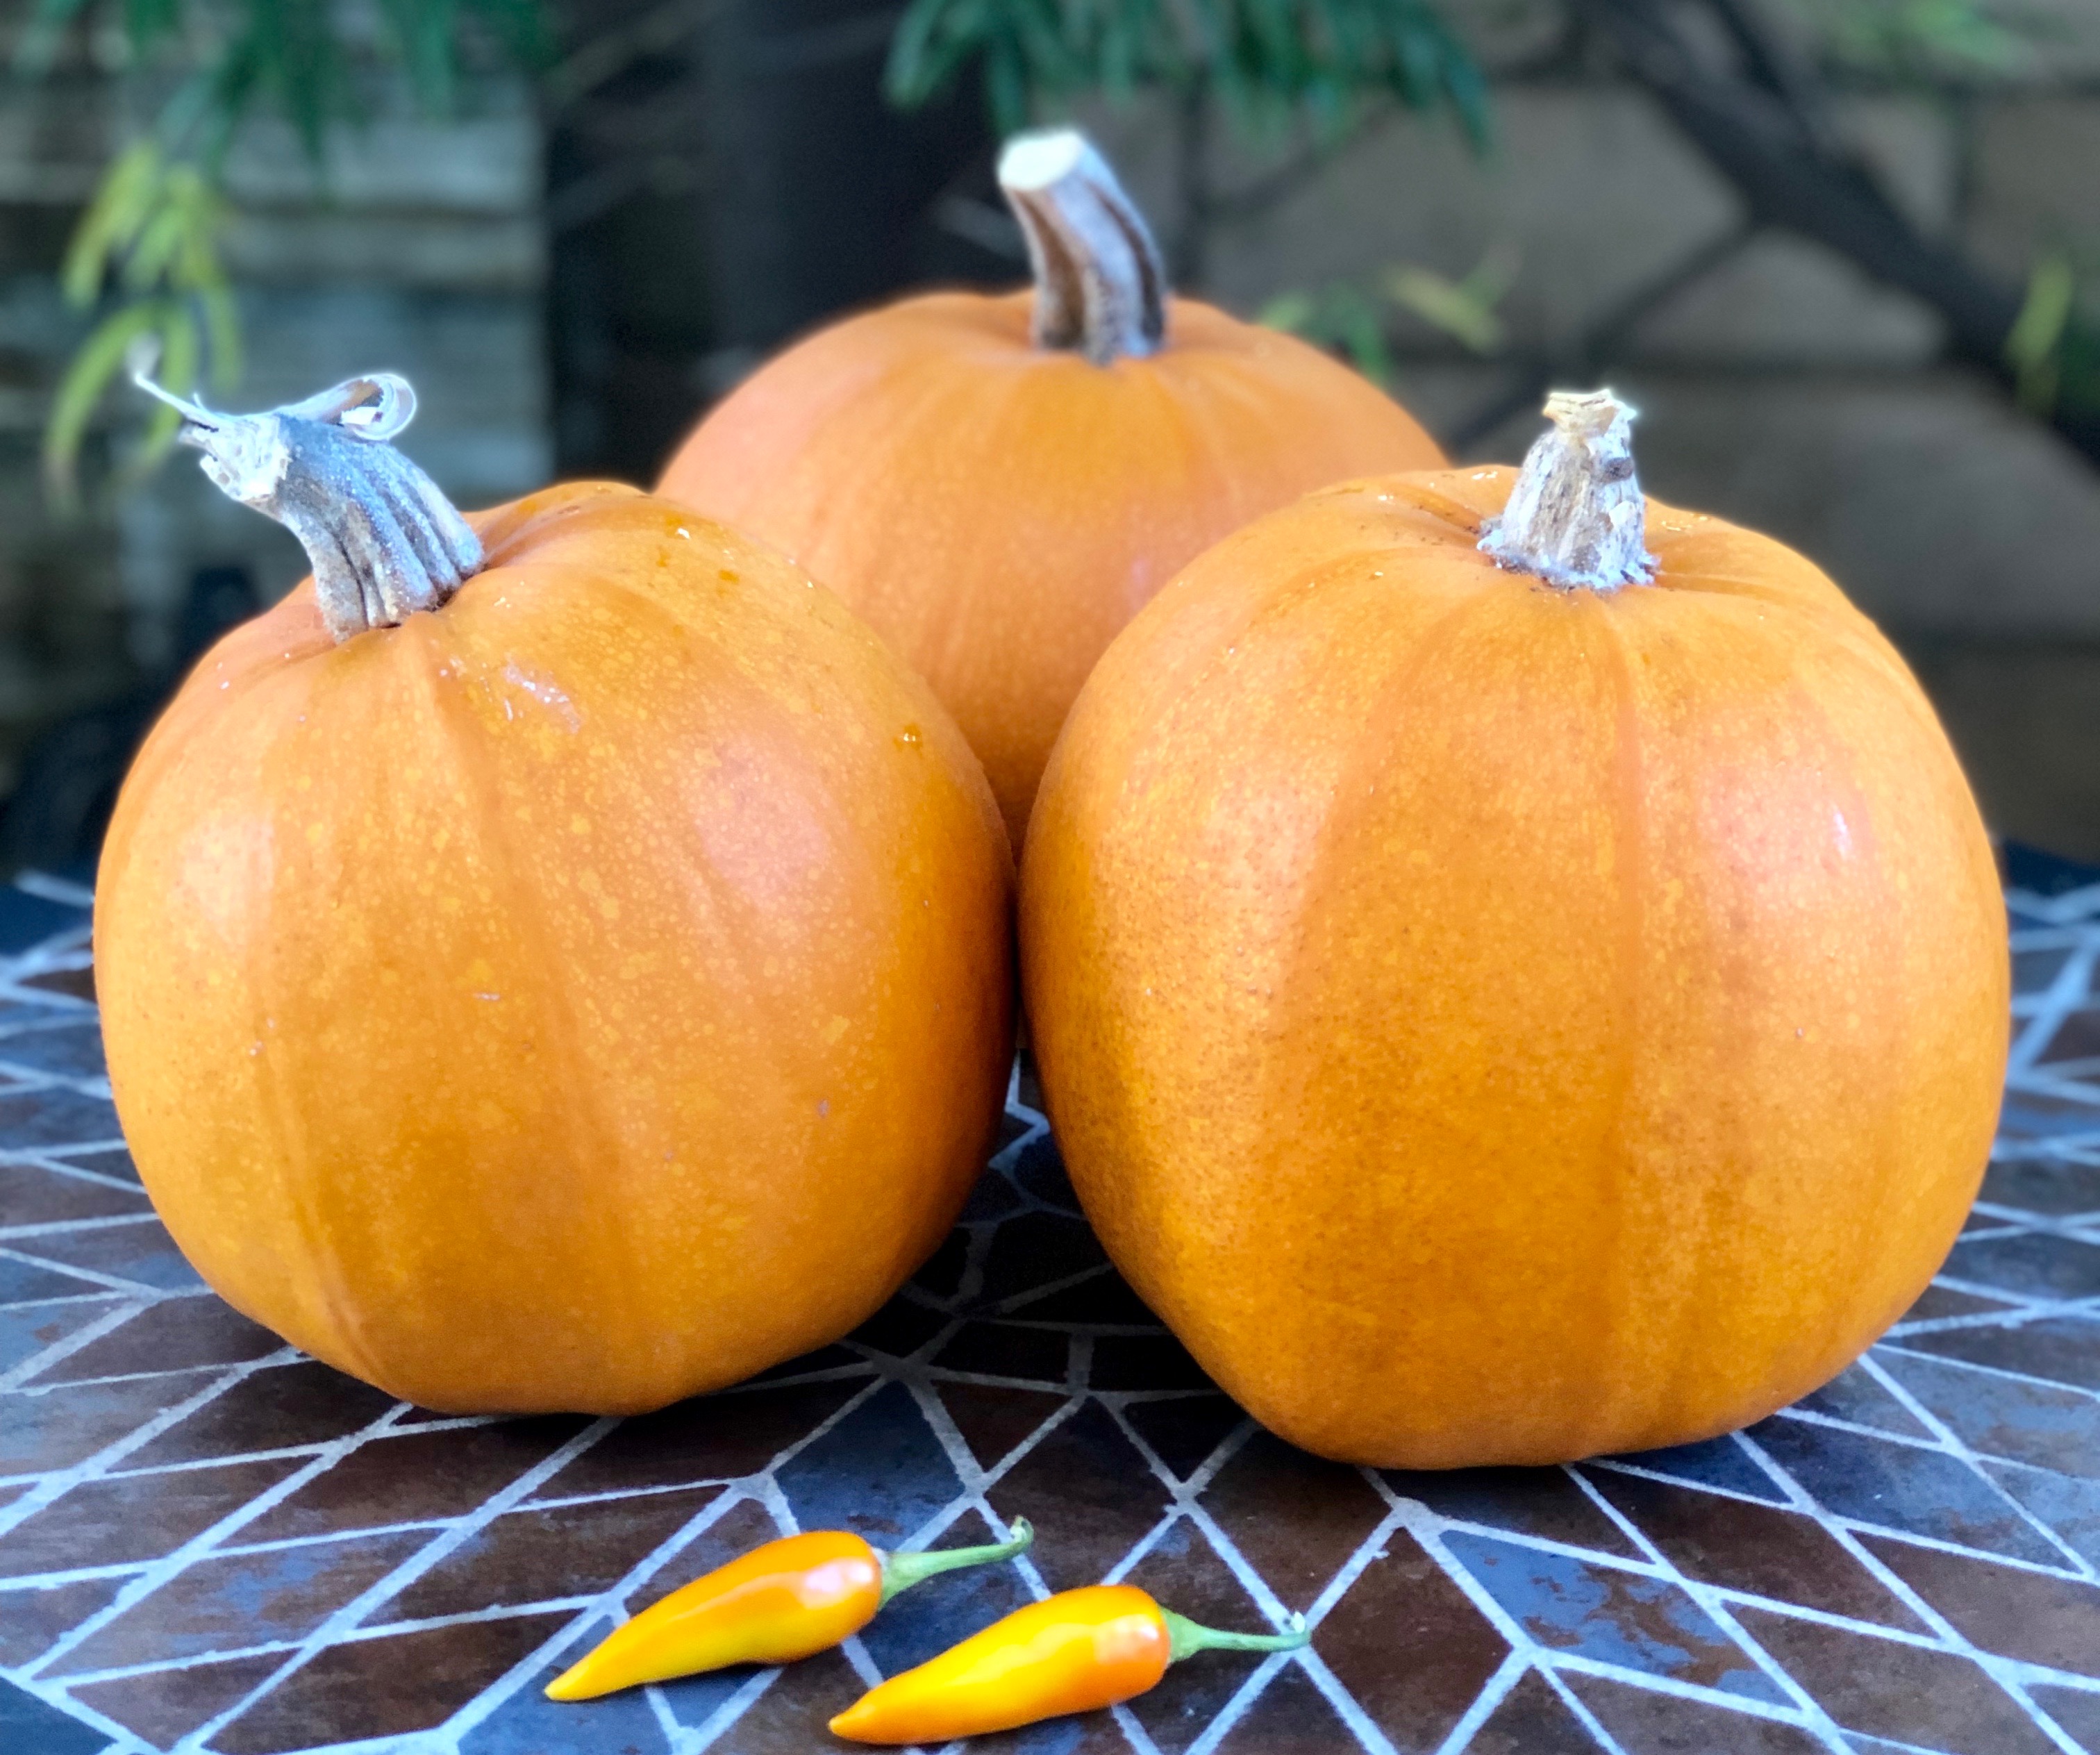 My husband's three harvested bright orange pumpkins weighing between five and seven pounds each with two yellow banana peppers on an outdoor table.